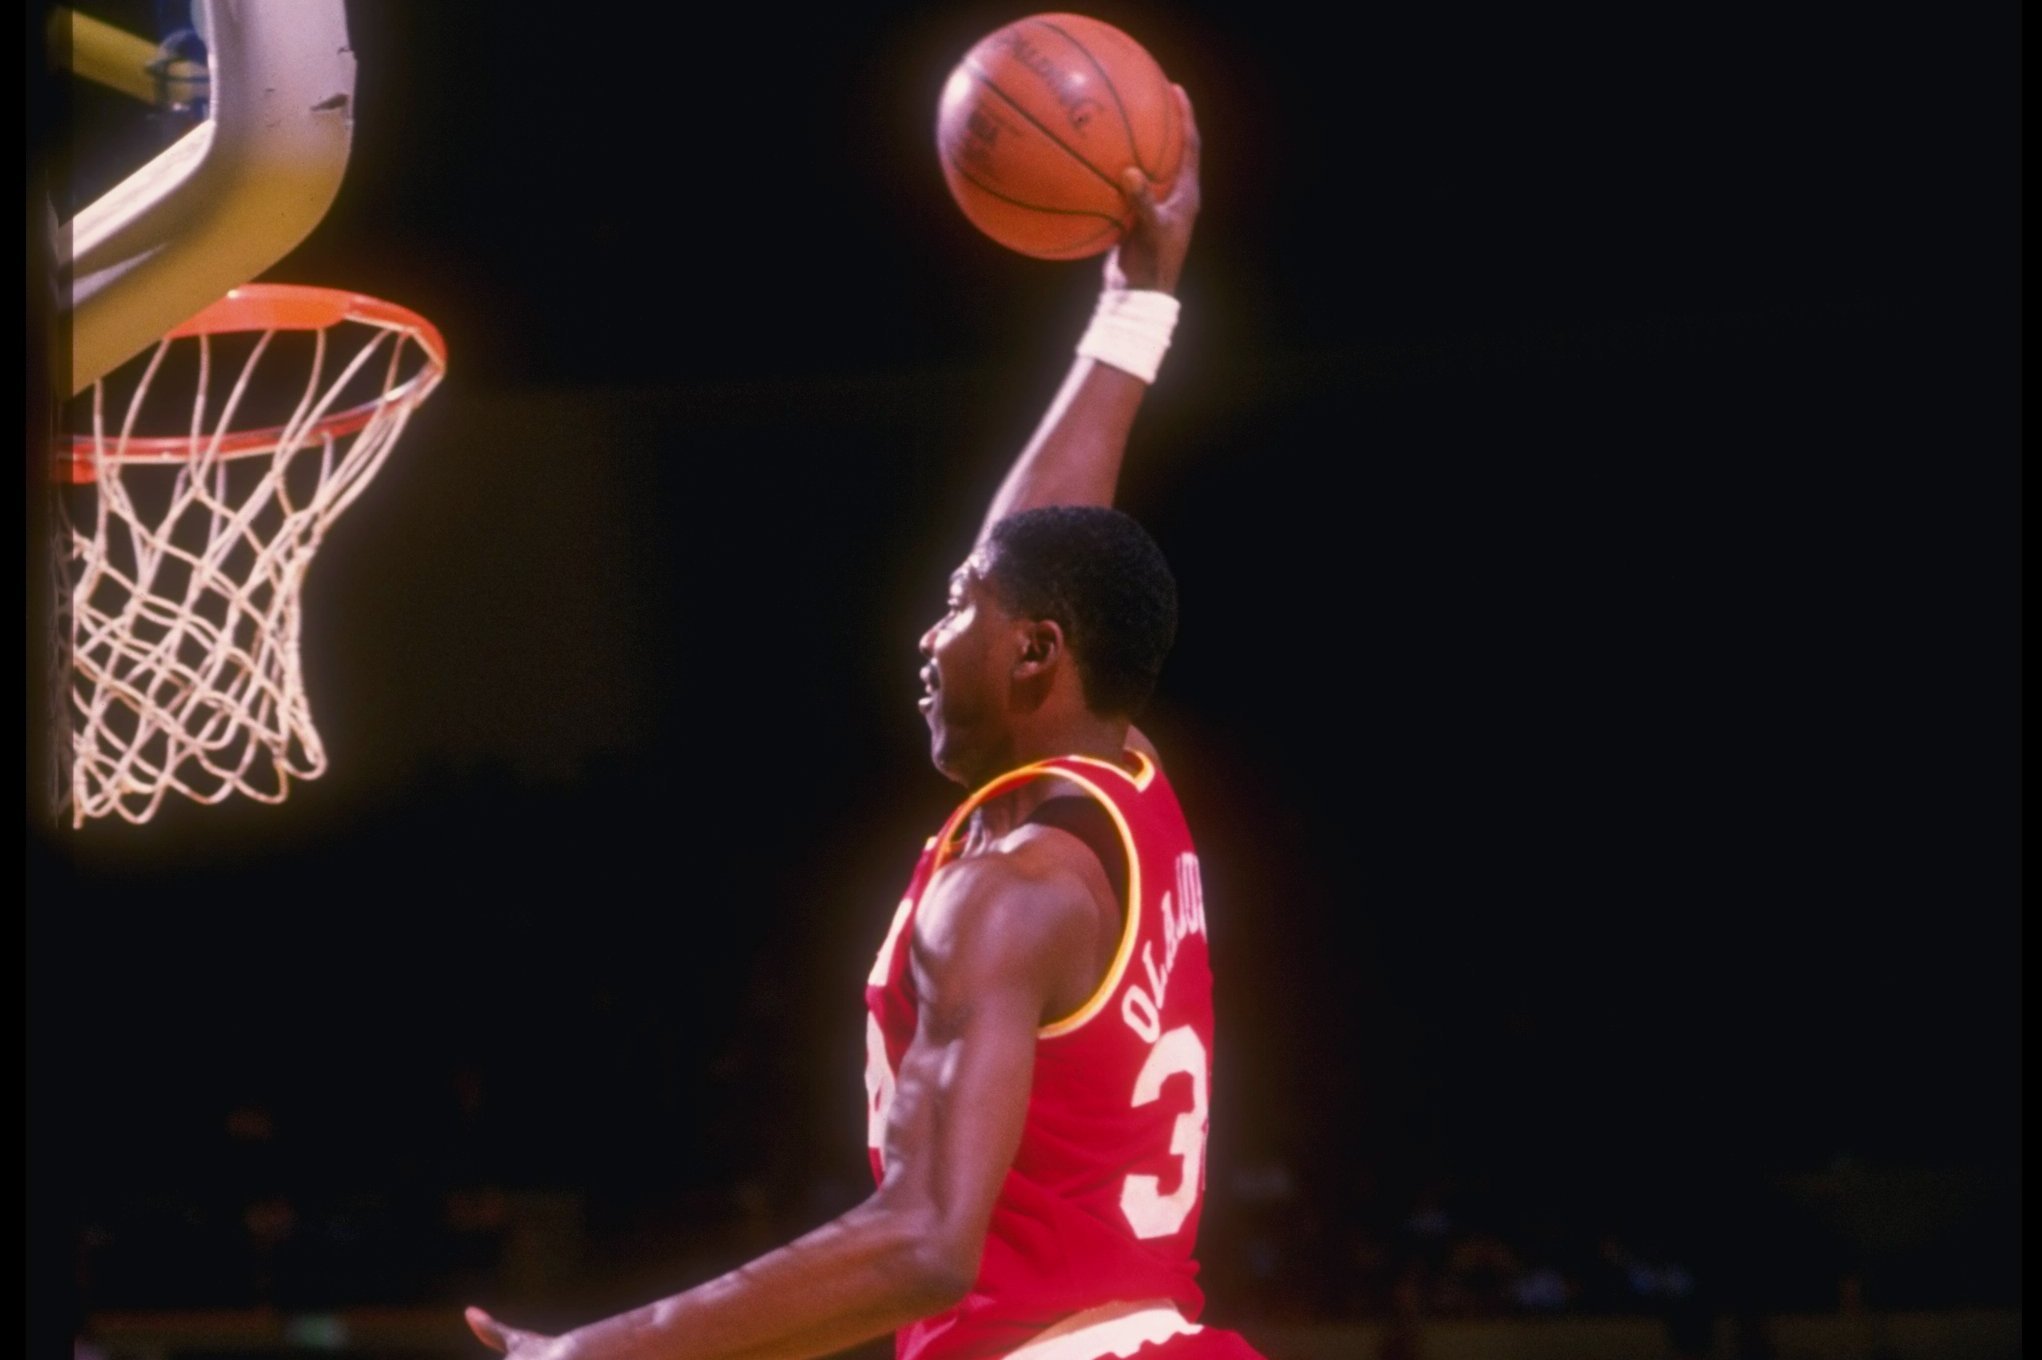 New York Knicks' Patrick Ewing does a reverse slam dunk during